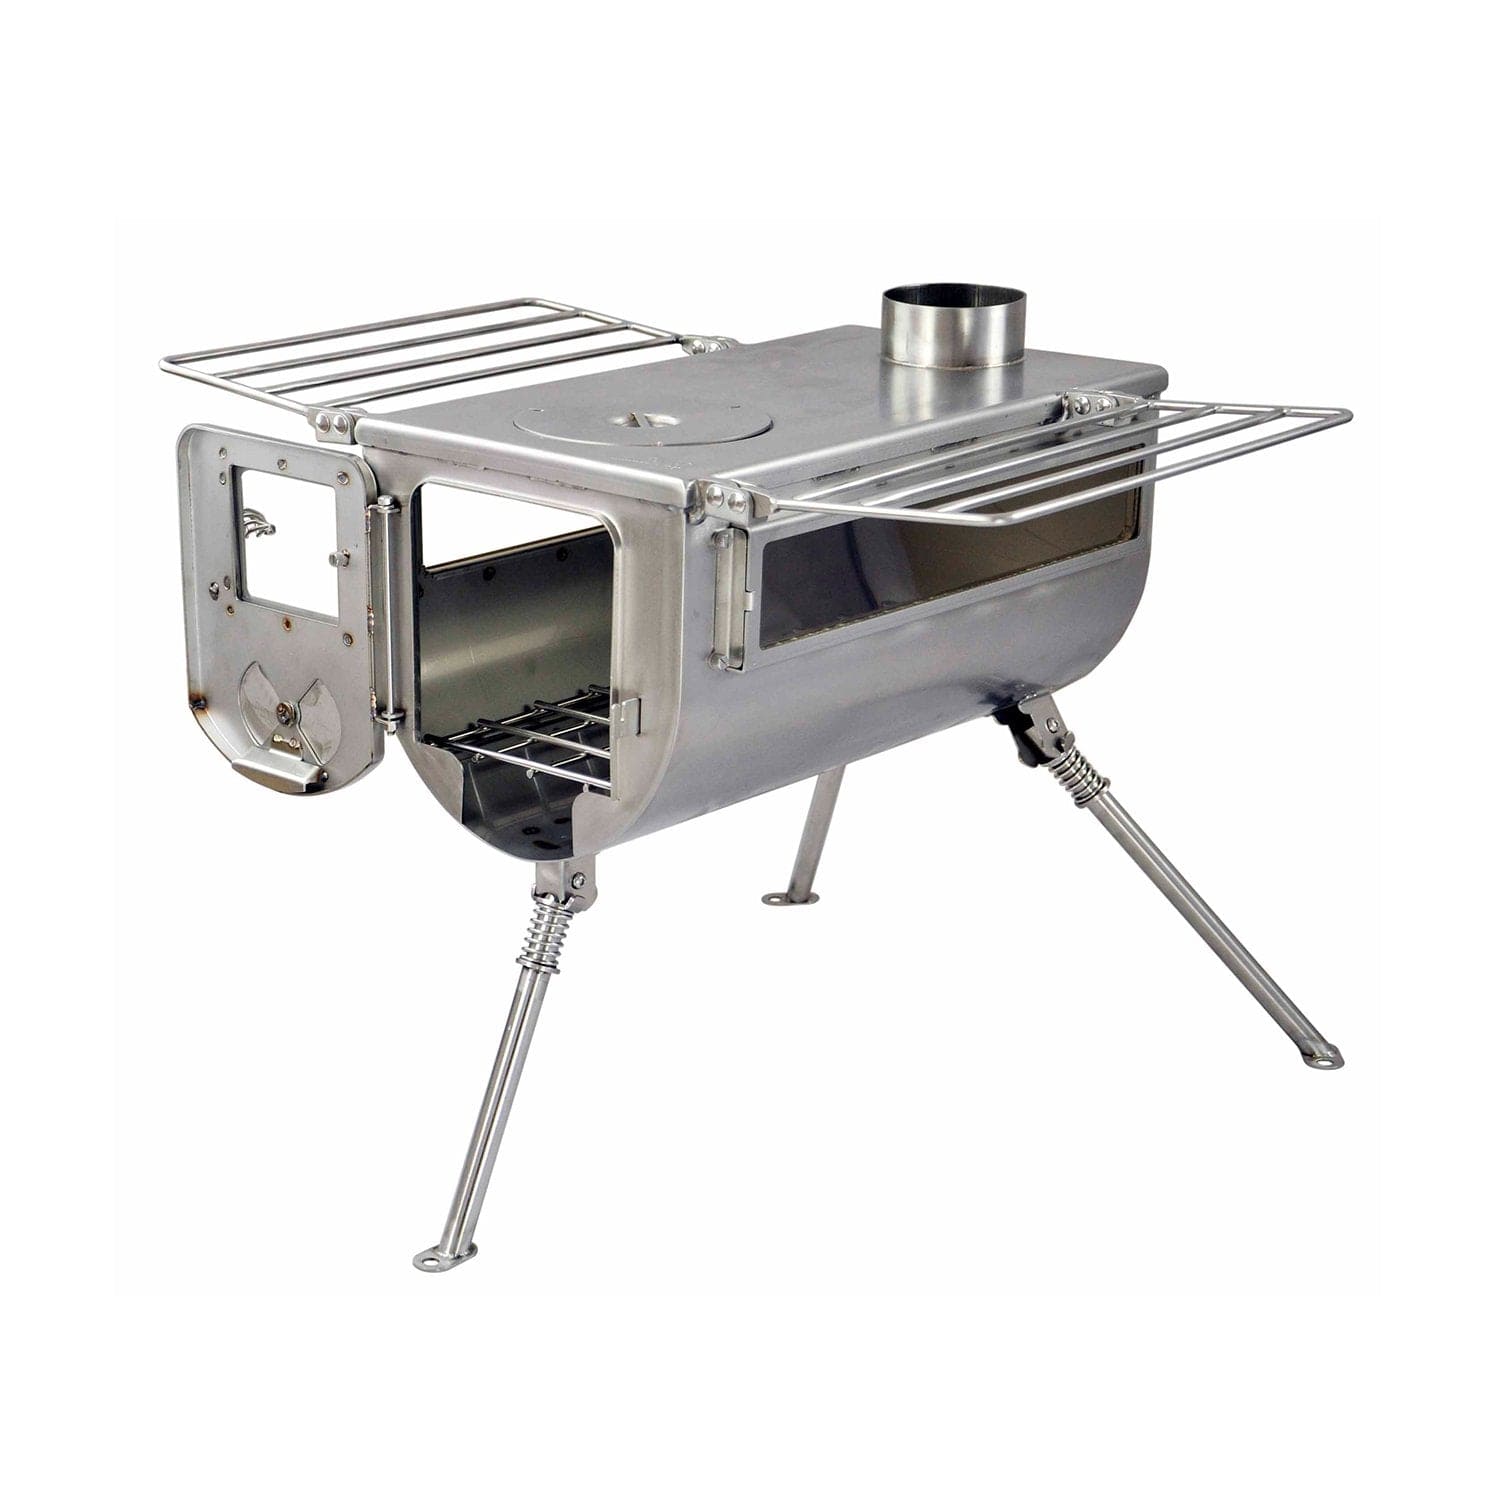 Winnerwell Tent Stove Woodlander Large Double-View Wood Stove